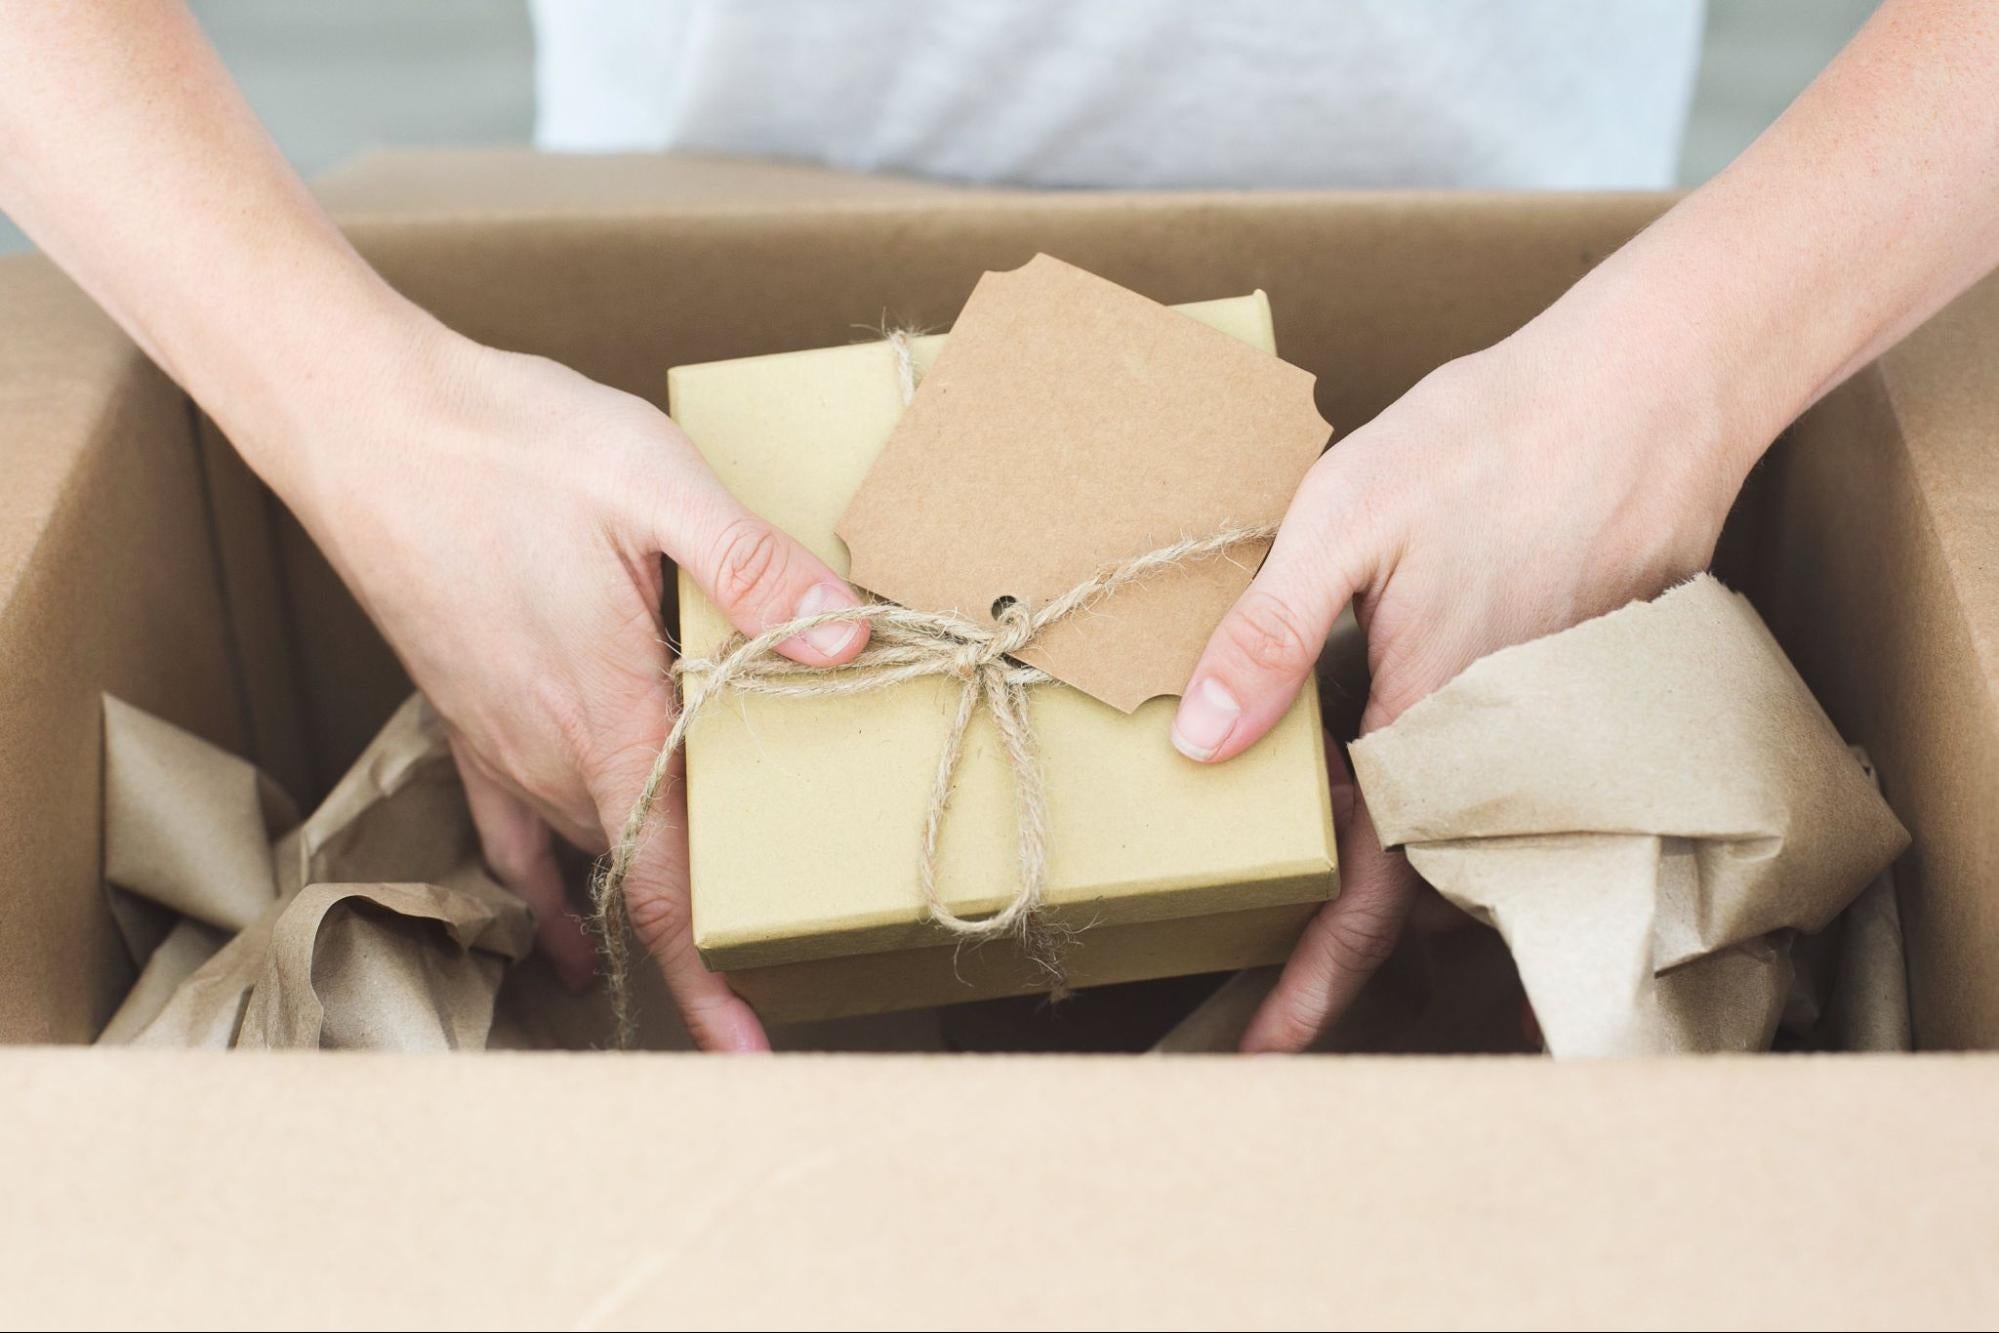 A person lifting a wrapped present from a cardboard box.